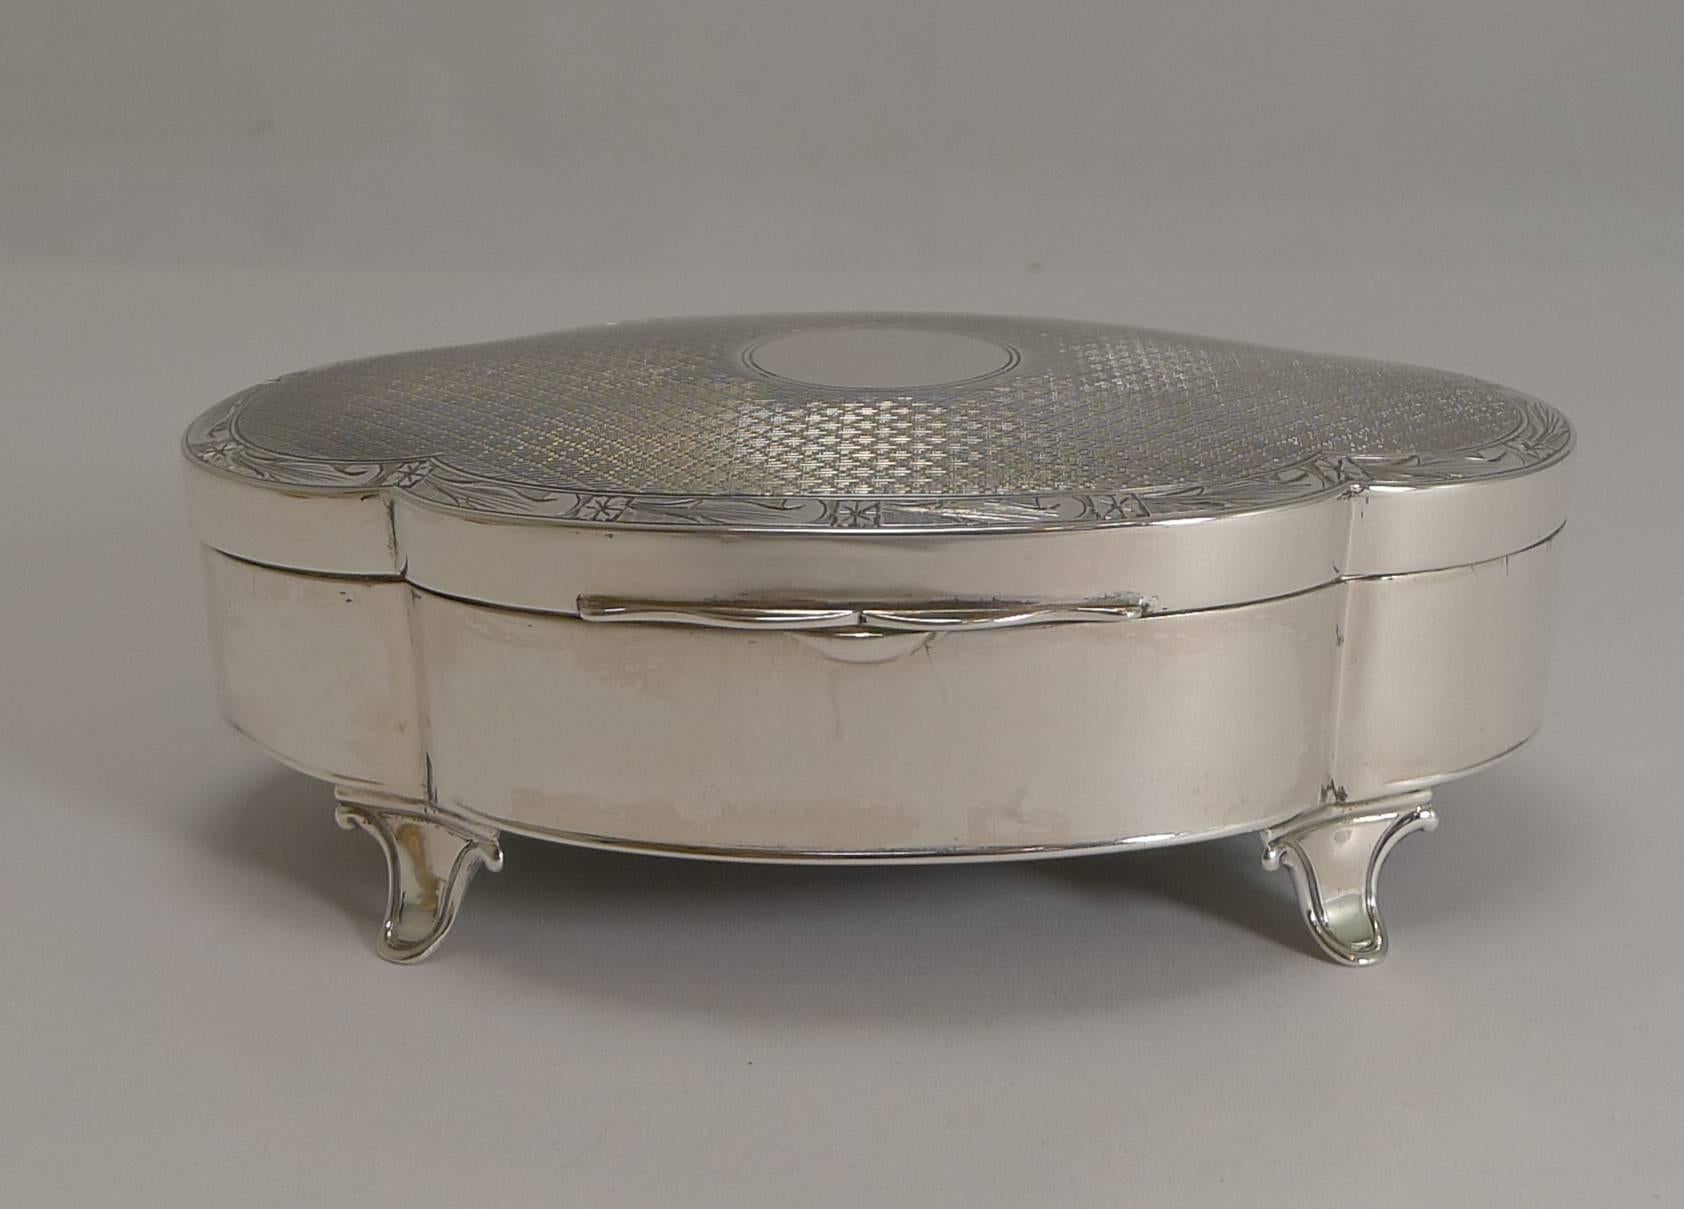 A beautiful and very elegant jewelry box made from English sterling silver by the top-notch silversmith, Goldsmith's and Silversmith's Company of Regent Street, London.

The box stands on four pretty feet and is beautifully shaped. The lid is